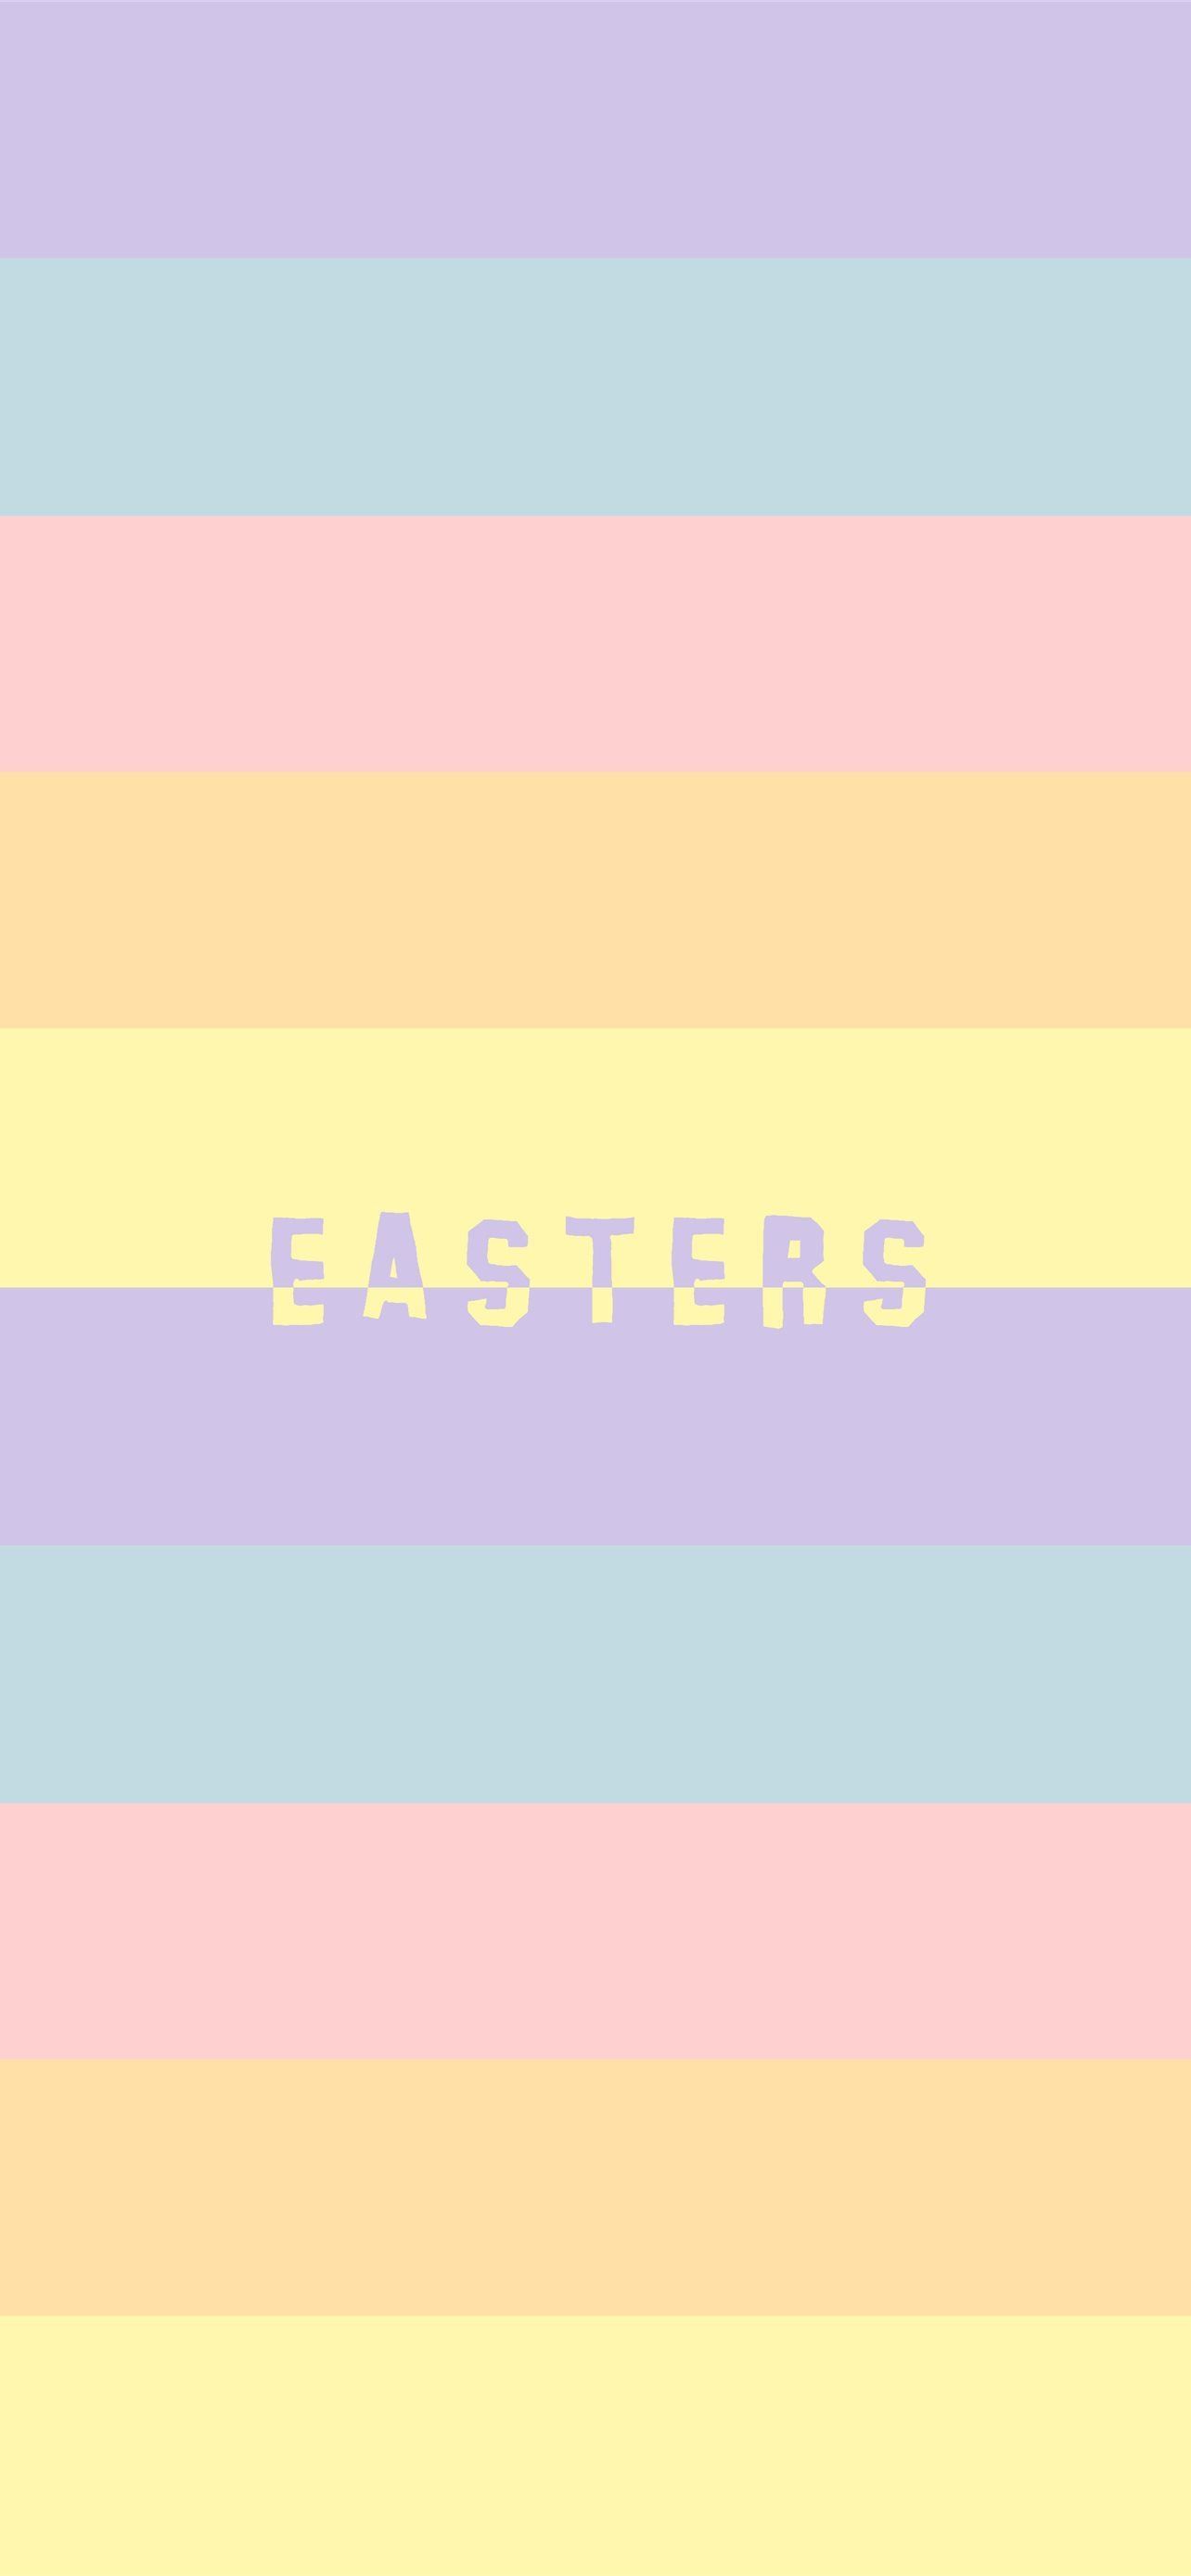 A colorful striped Easter iPhone wallpaper with the text Easter in the middle - Easter, egg